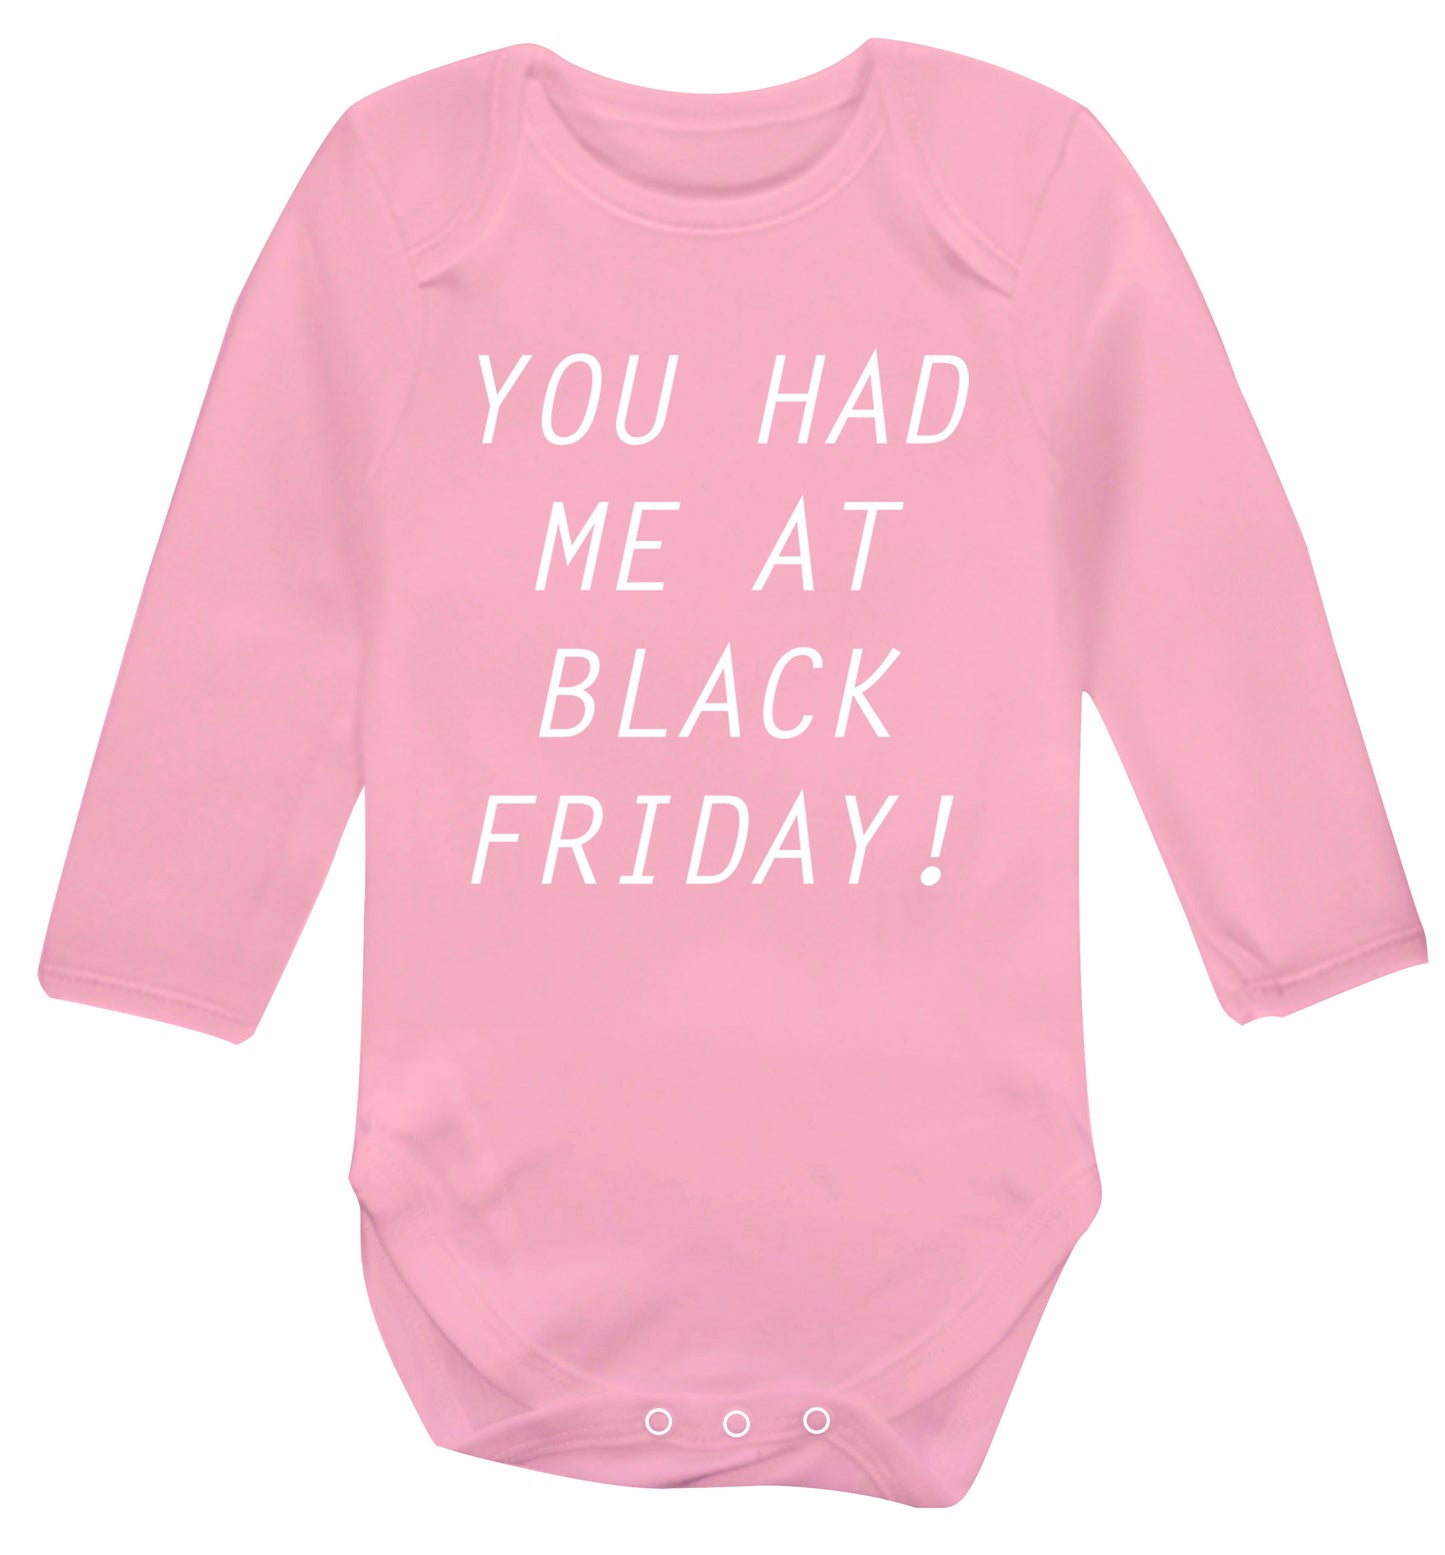 You had me at black friday Baby Vest long sleeved pale pink 6-12 months